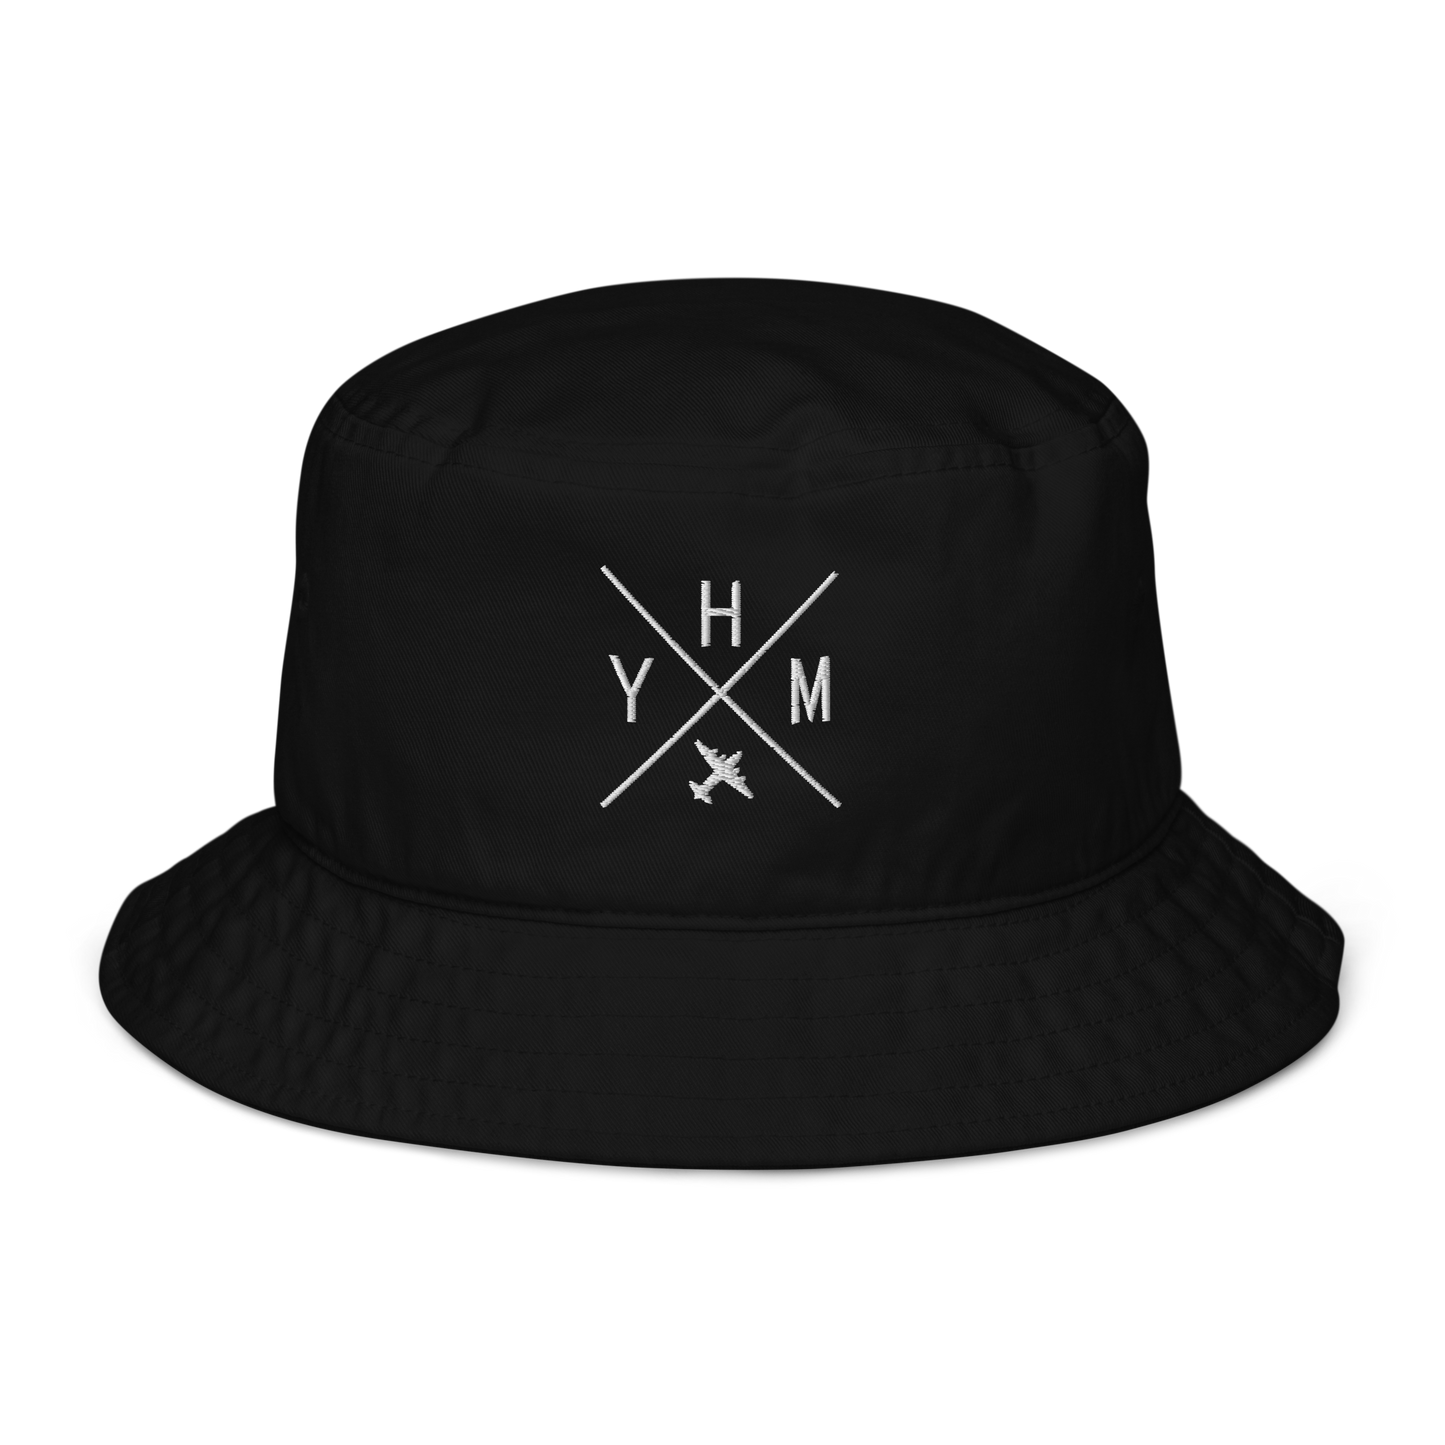 YHM Designs - YHM Hamilton Organic Cotton Bucket Hat - Crossed-X Design with Airport Code and Vintage Propliner - White Embroidery - Image 01